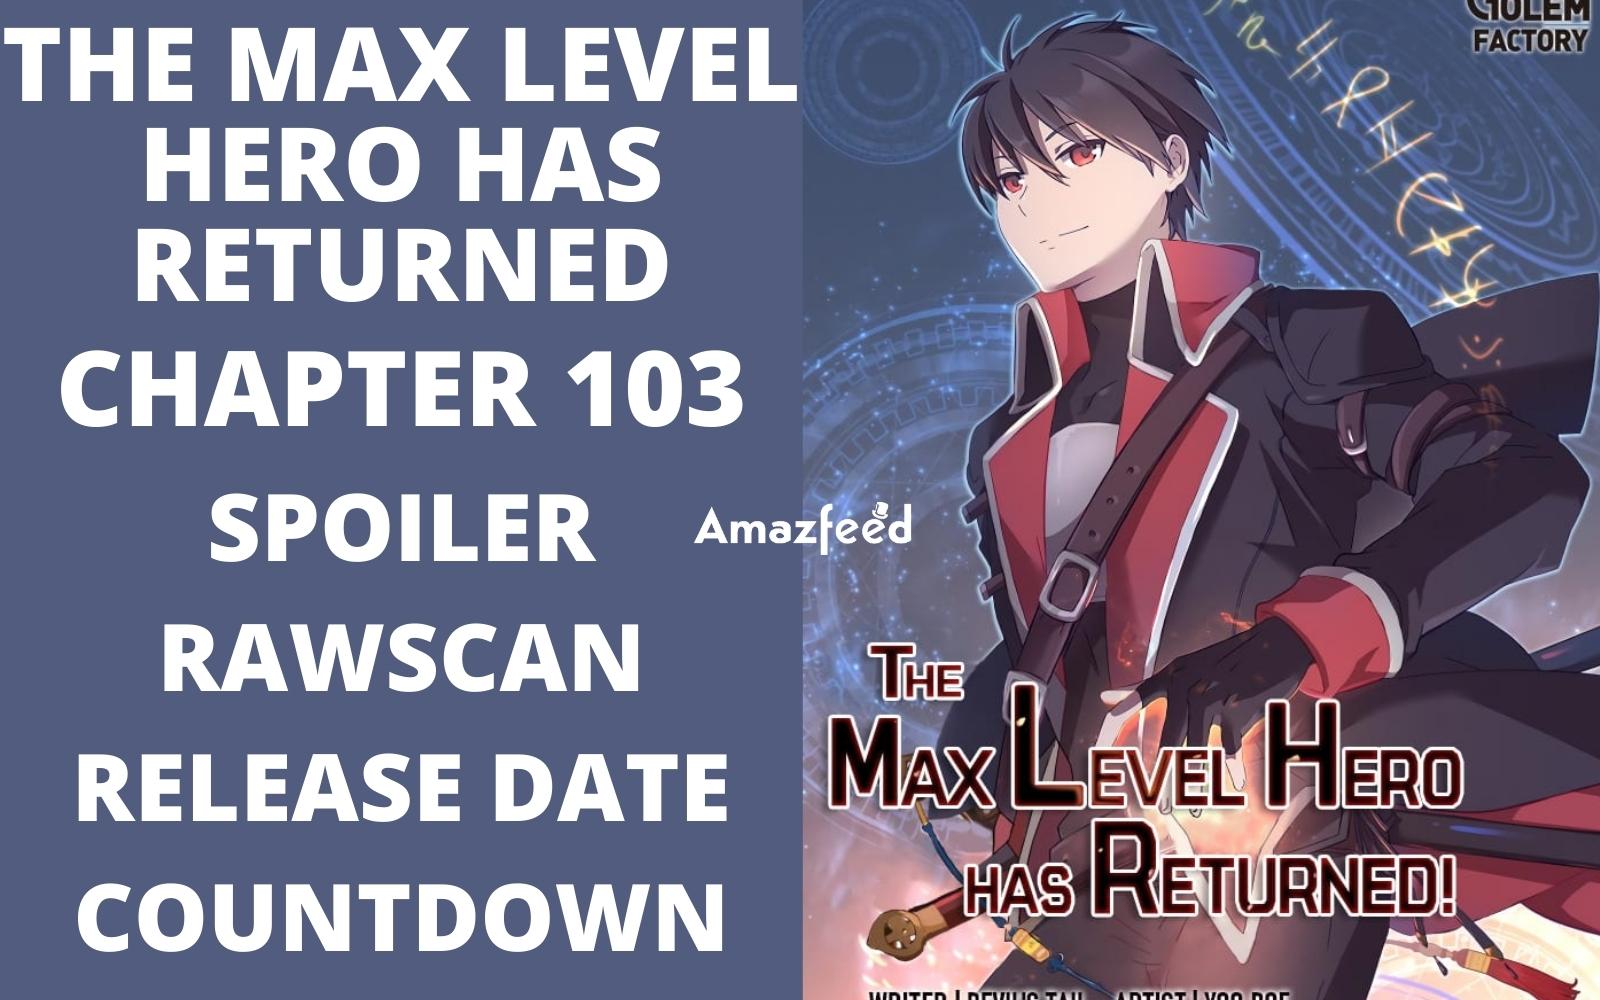 The Max Level Hero Has Returned Chapter 103 Spoiler, Release Date, Raw Scan, Countdown, Color Page